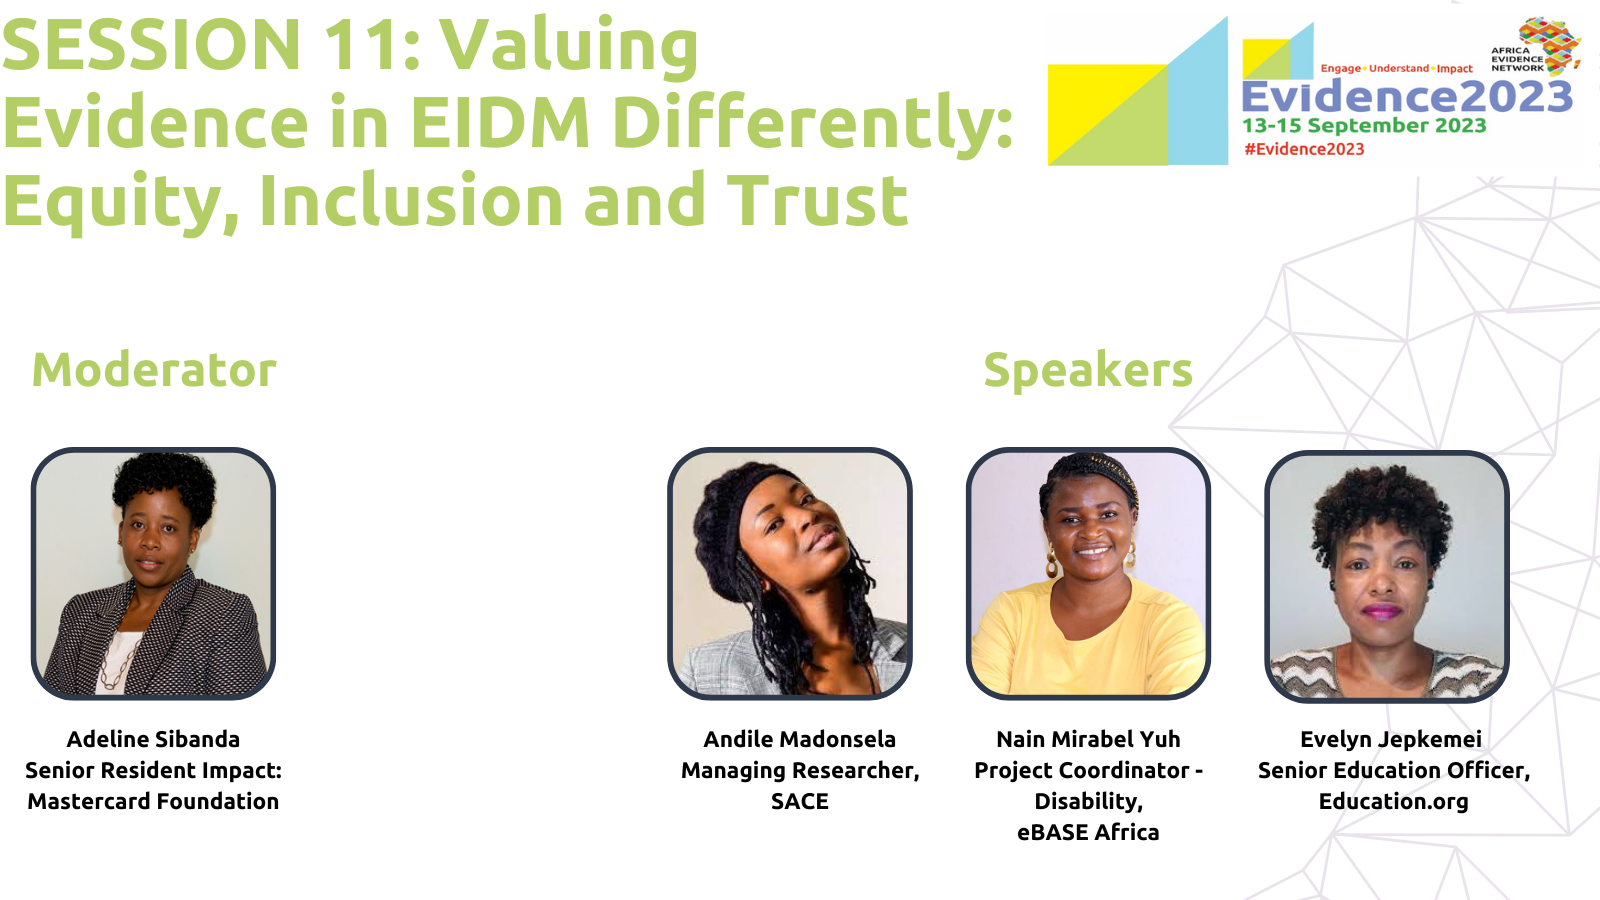 PRESENTATION | Valuing Evidence in EIDM Differently: Equity Inclusion and Trust - Education.org